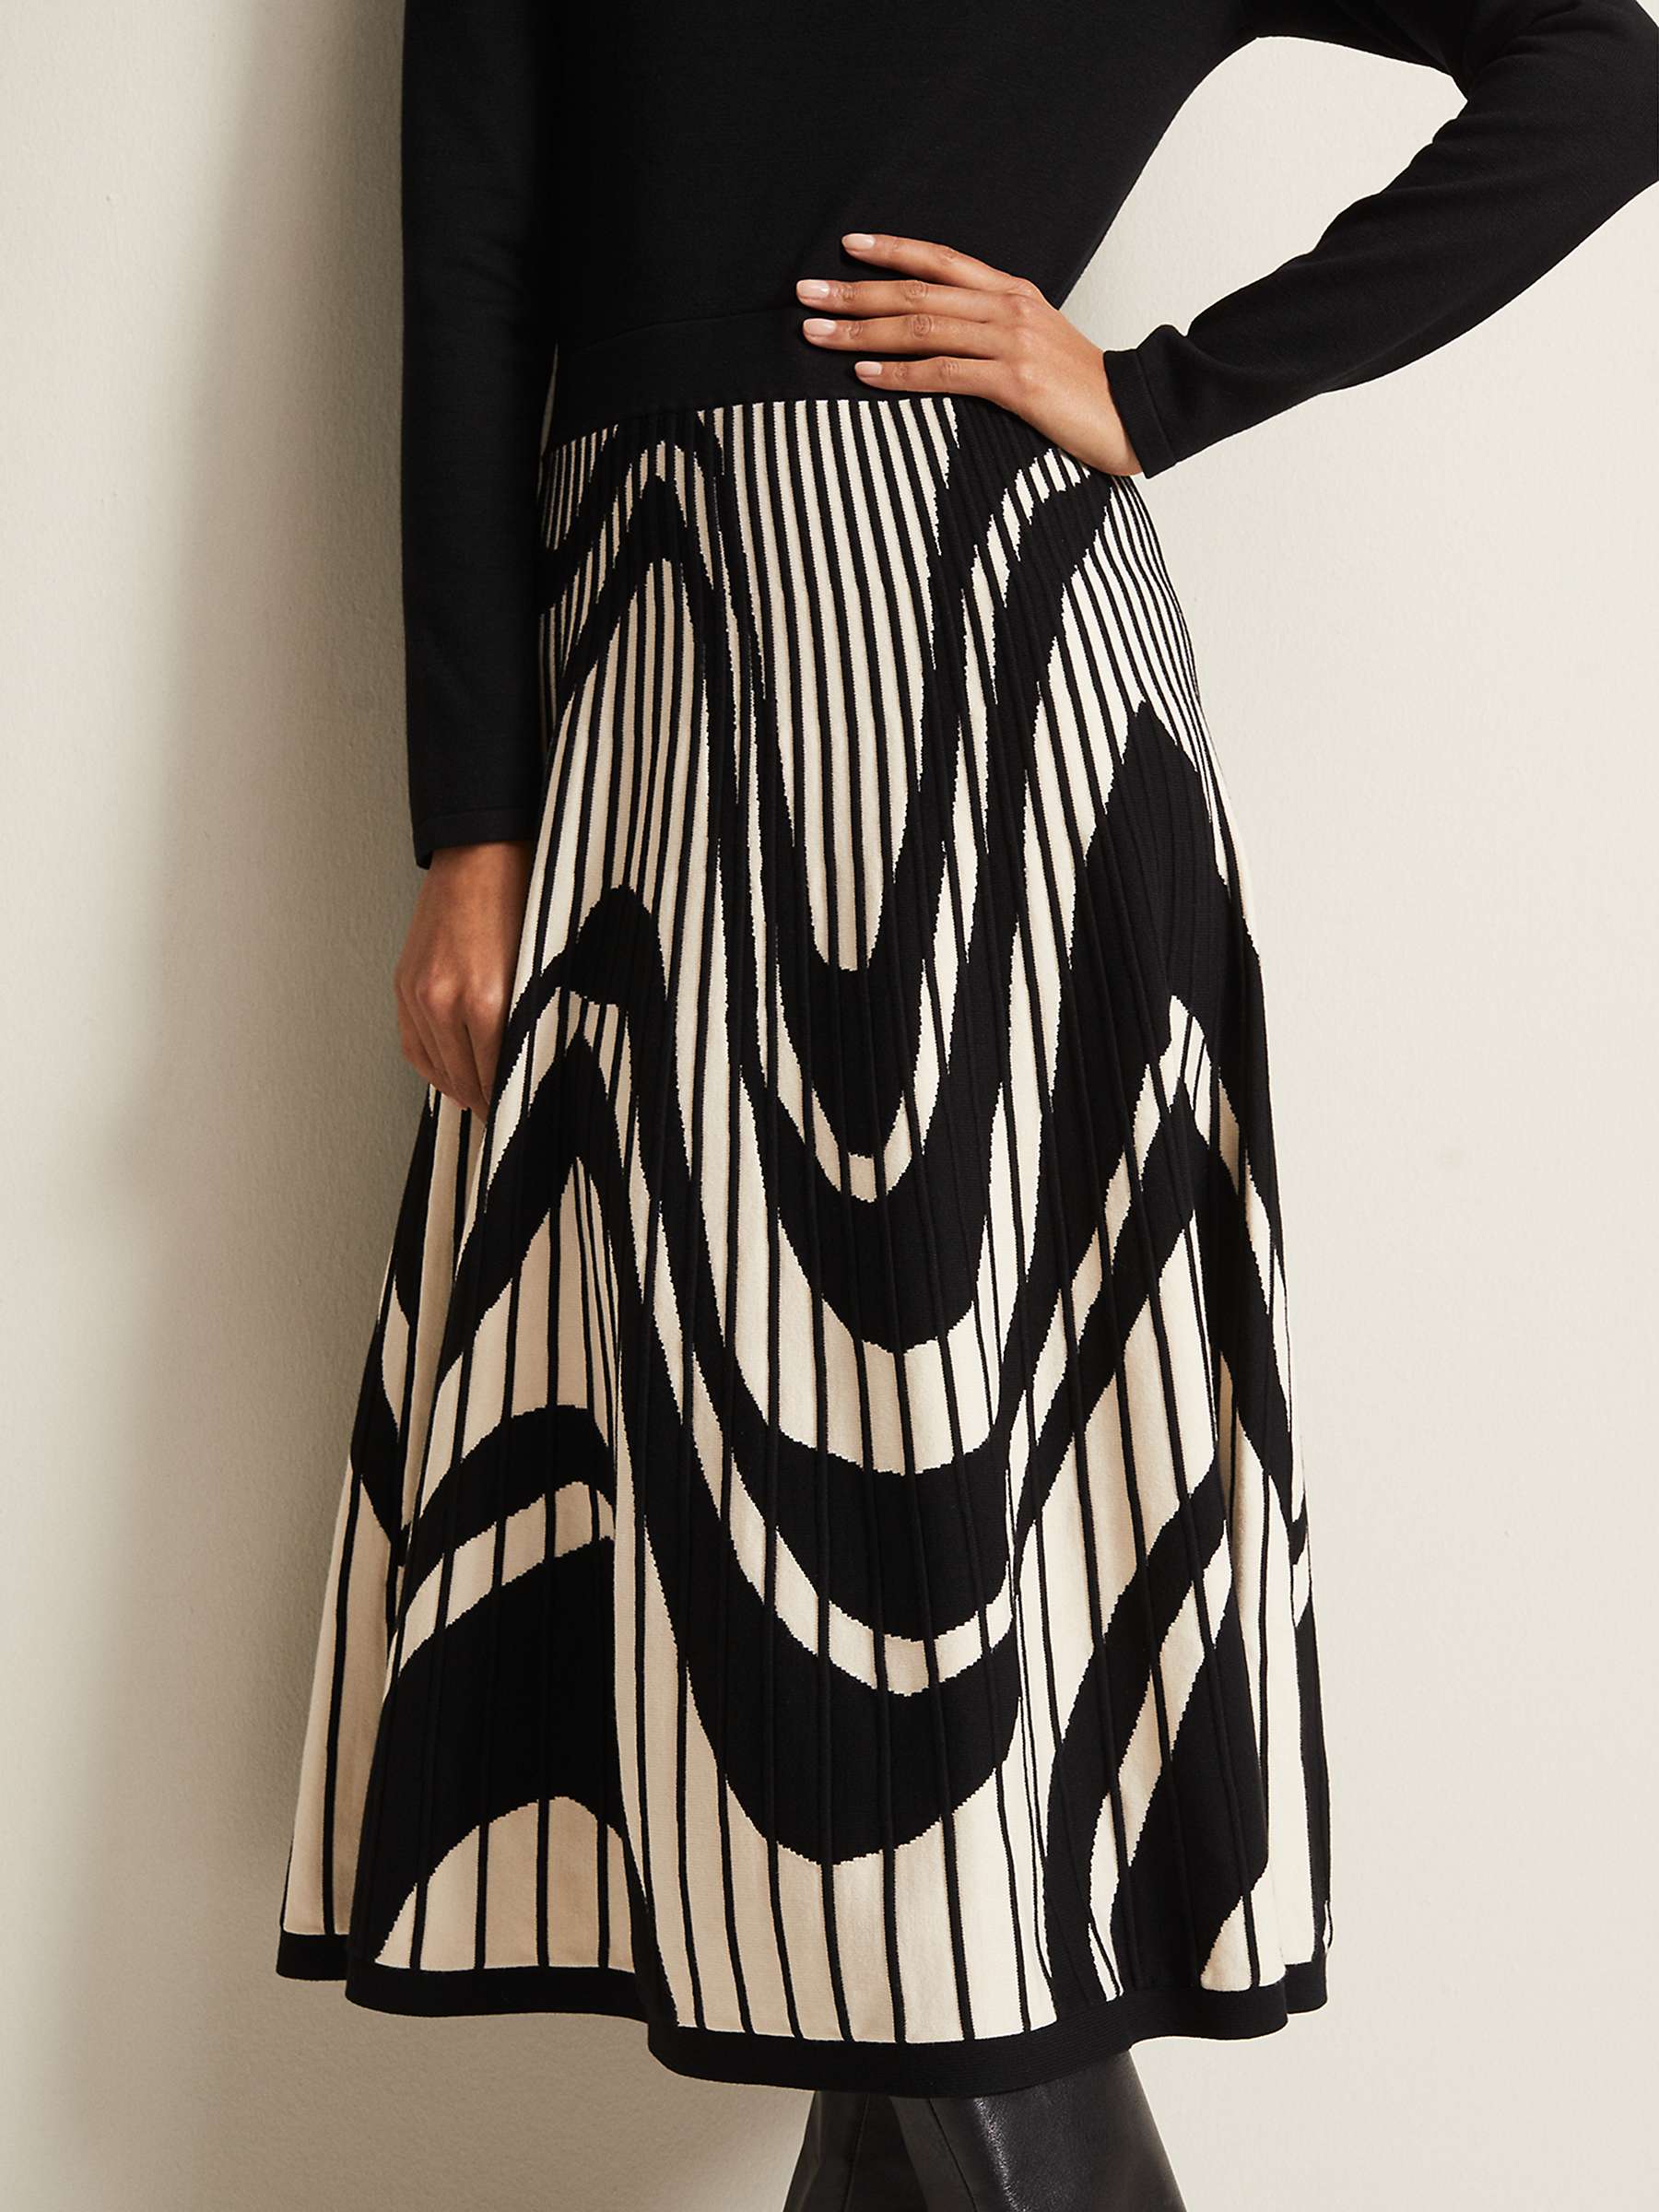 Buy Phase Eight Silvia Abstract Print Knit Dress, Black/Ivory Online at johnlewis.com